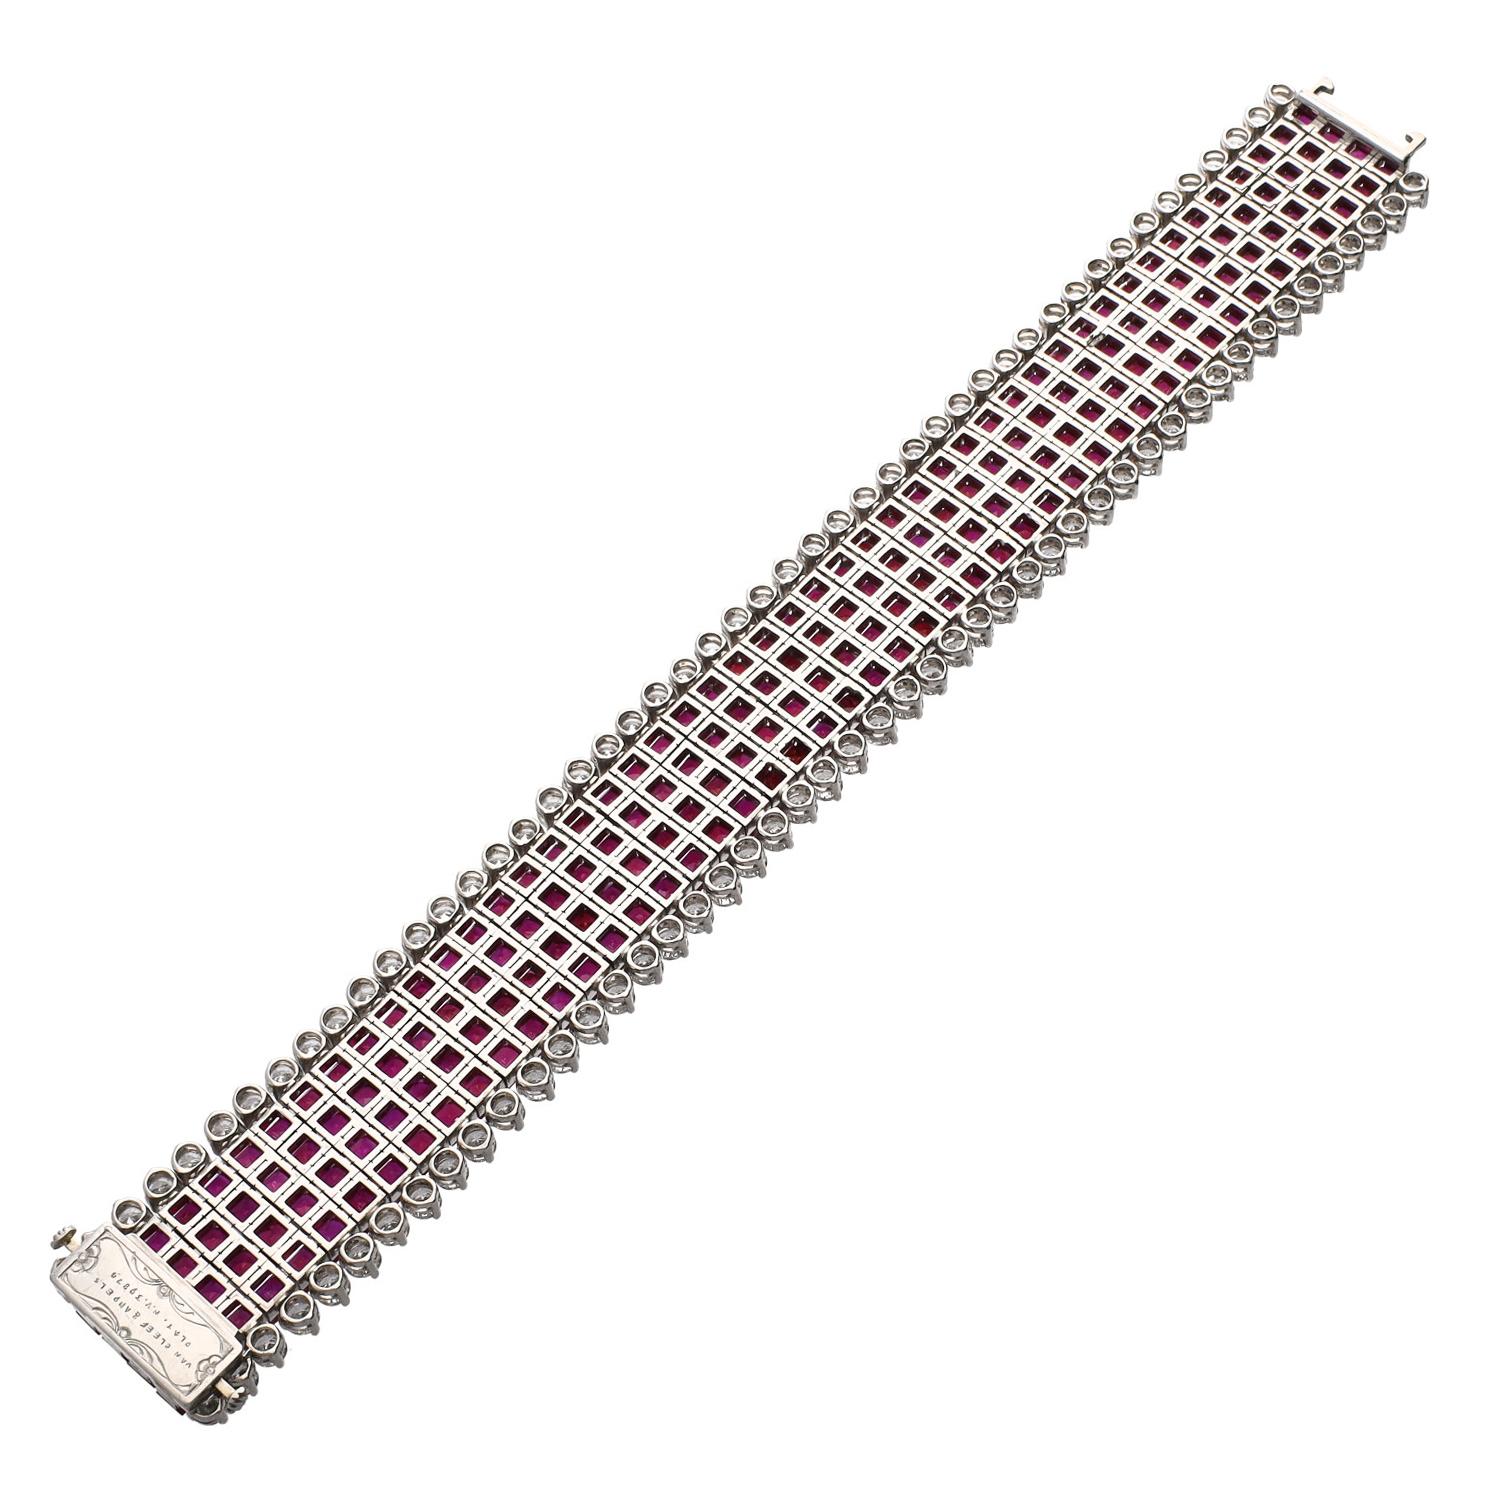 The highly flexible invisibly-set calibré-cut ruby four-row band, with diamond collet trim, mounted in platinum by Van Cleef & Arpels, is regarded as one of the jewelry masterpieces of the twentieth century. Great in demand by fine jewelry